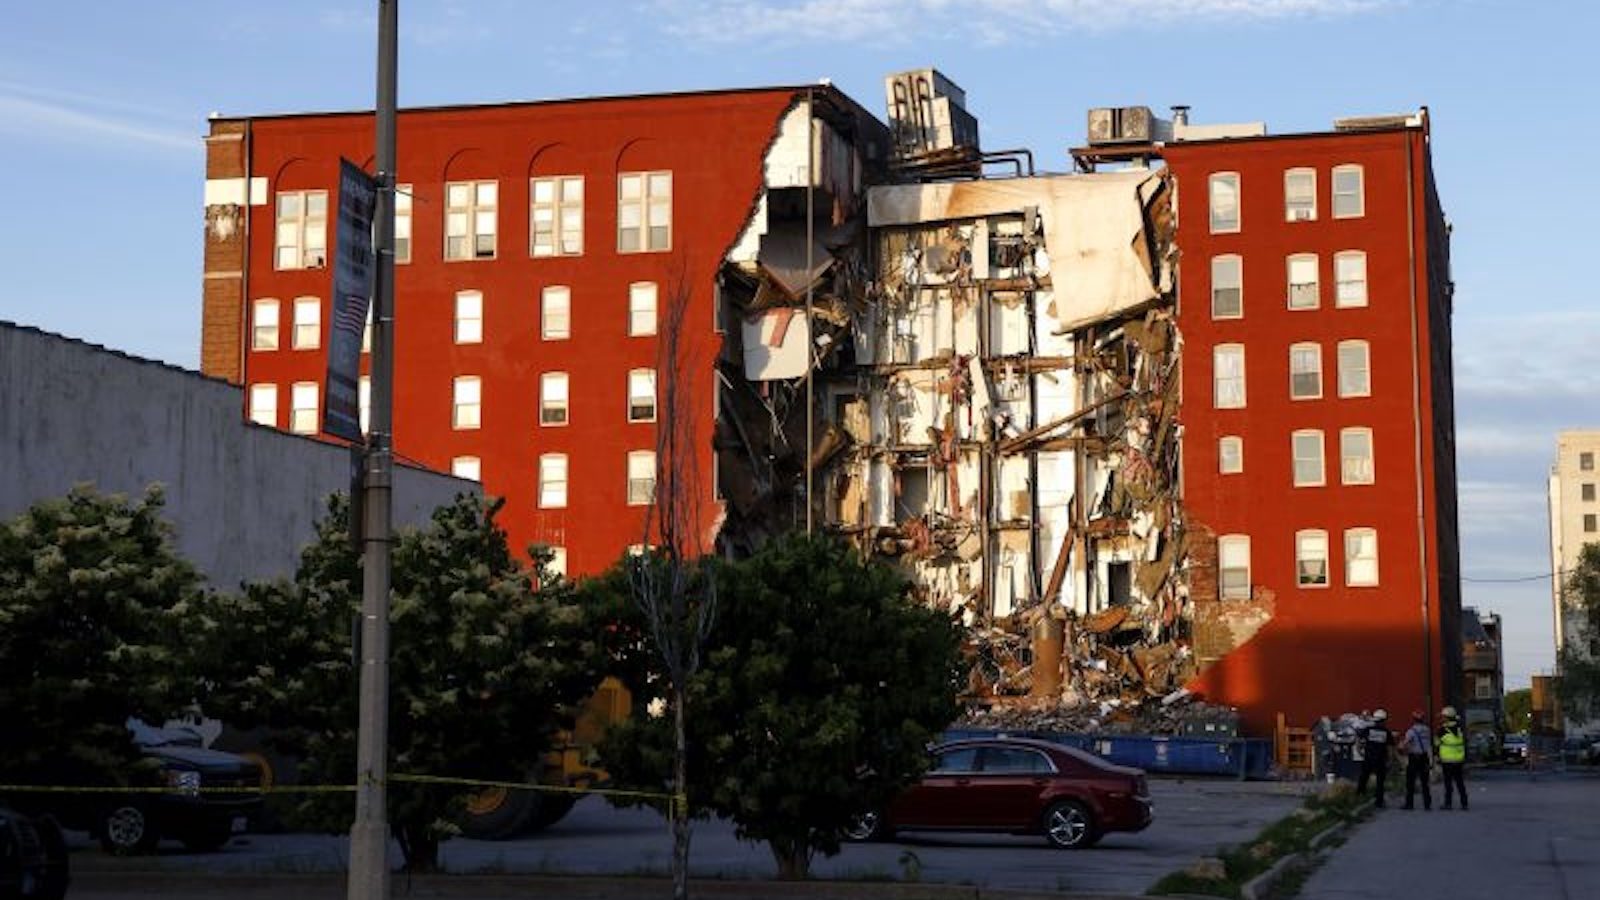 Partial collapse of an apartment building in Davenport, Iowa: a person is rescued and the search for the missing continues, authorities say